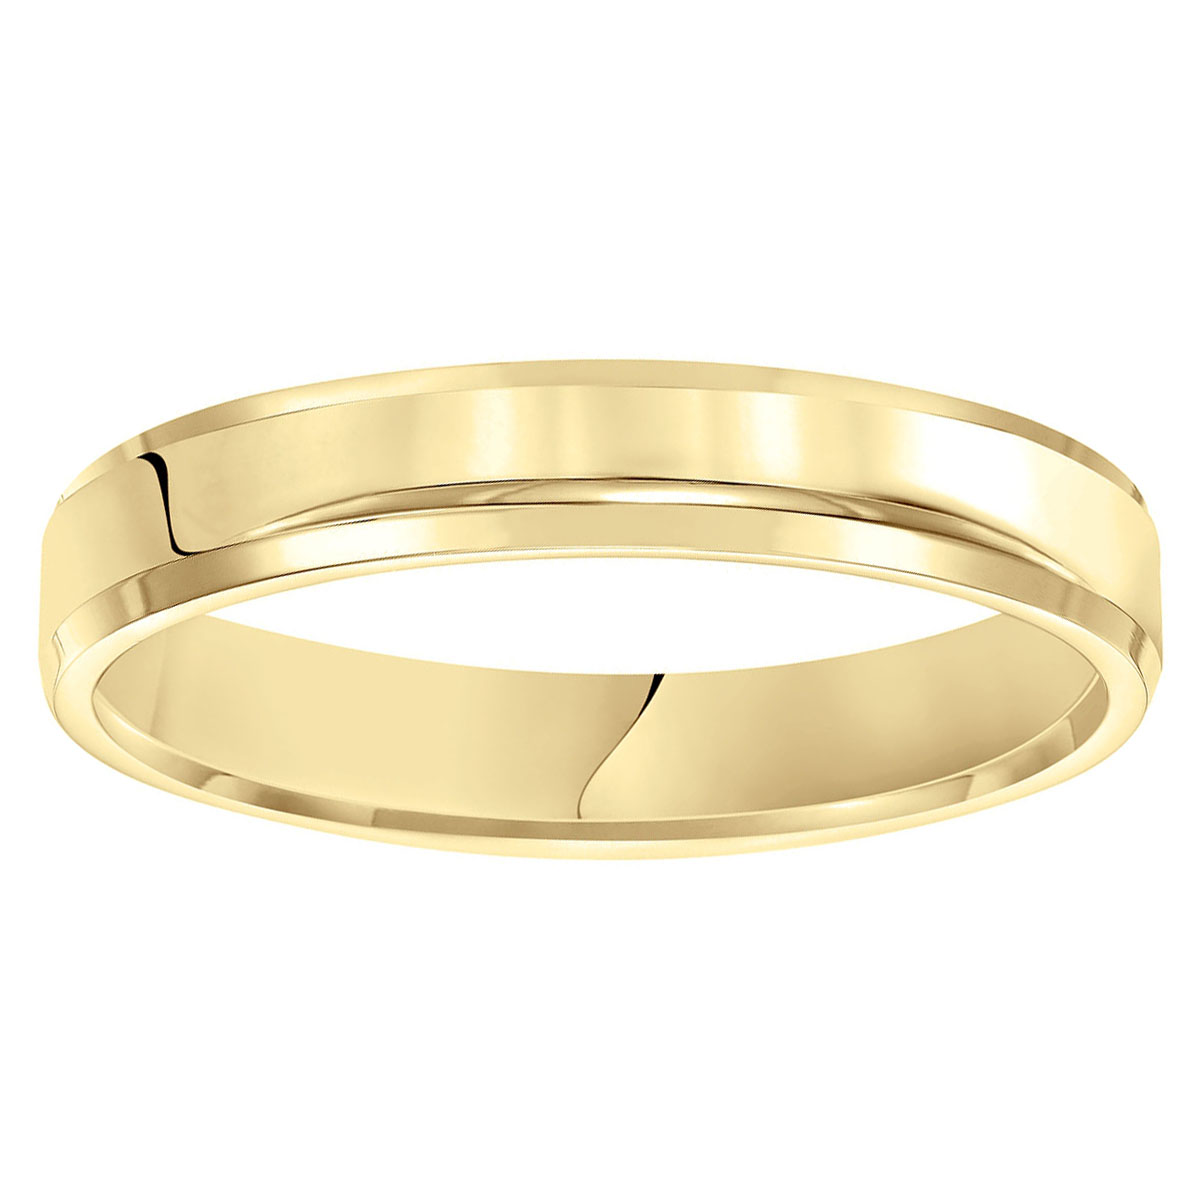 Yellow Gold 4 mm Comfort Fit Beveled Wedding Band, Size 10